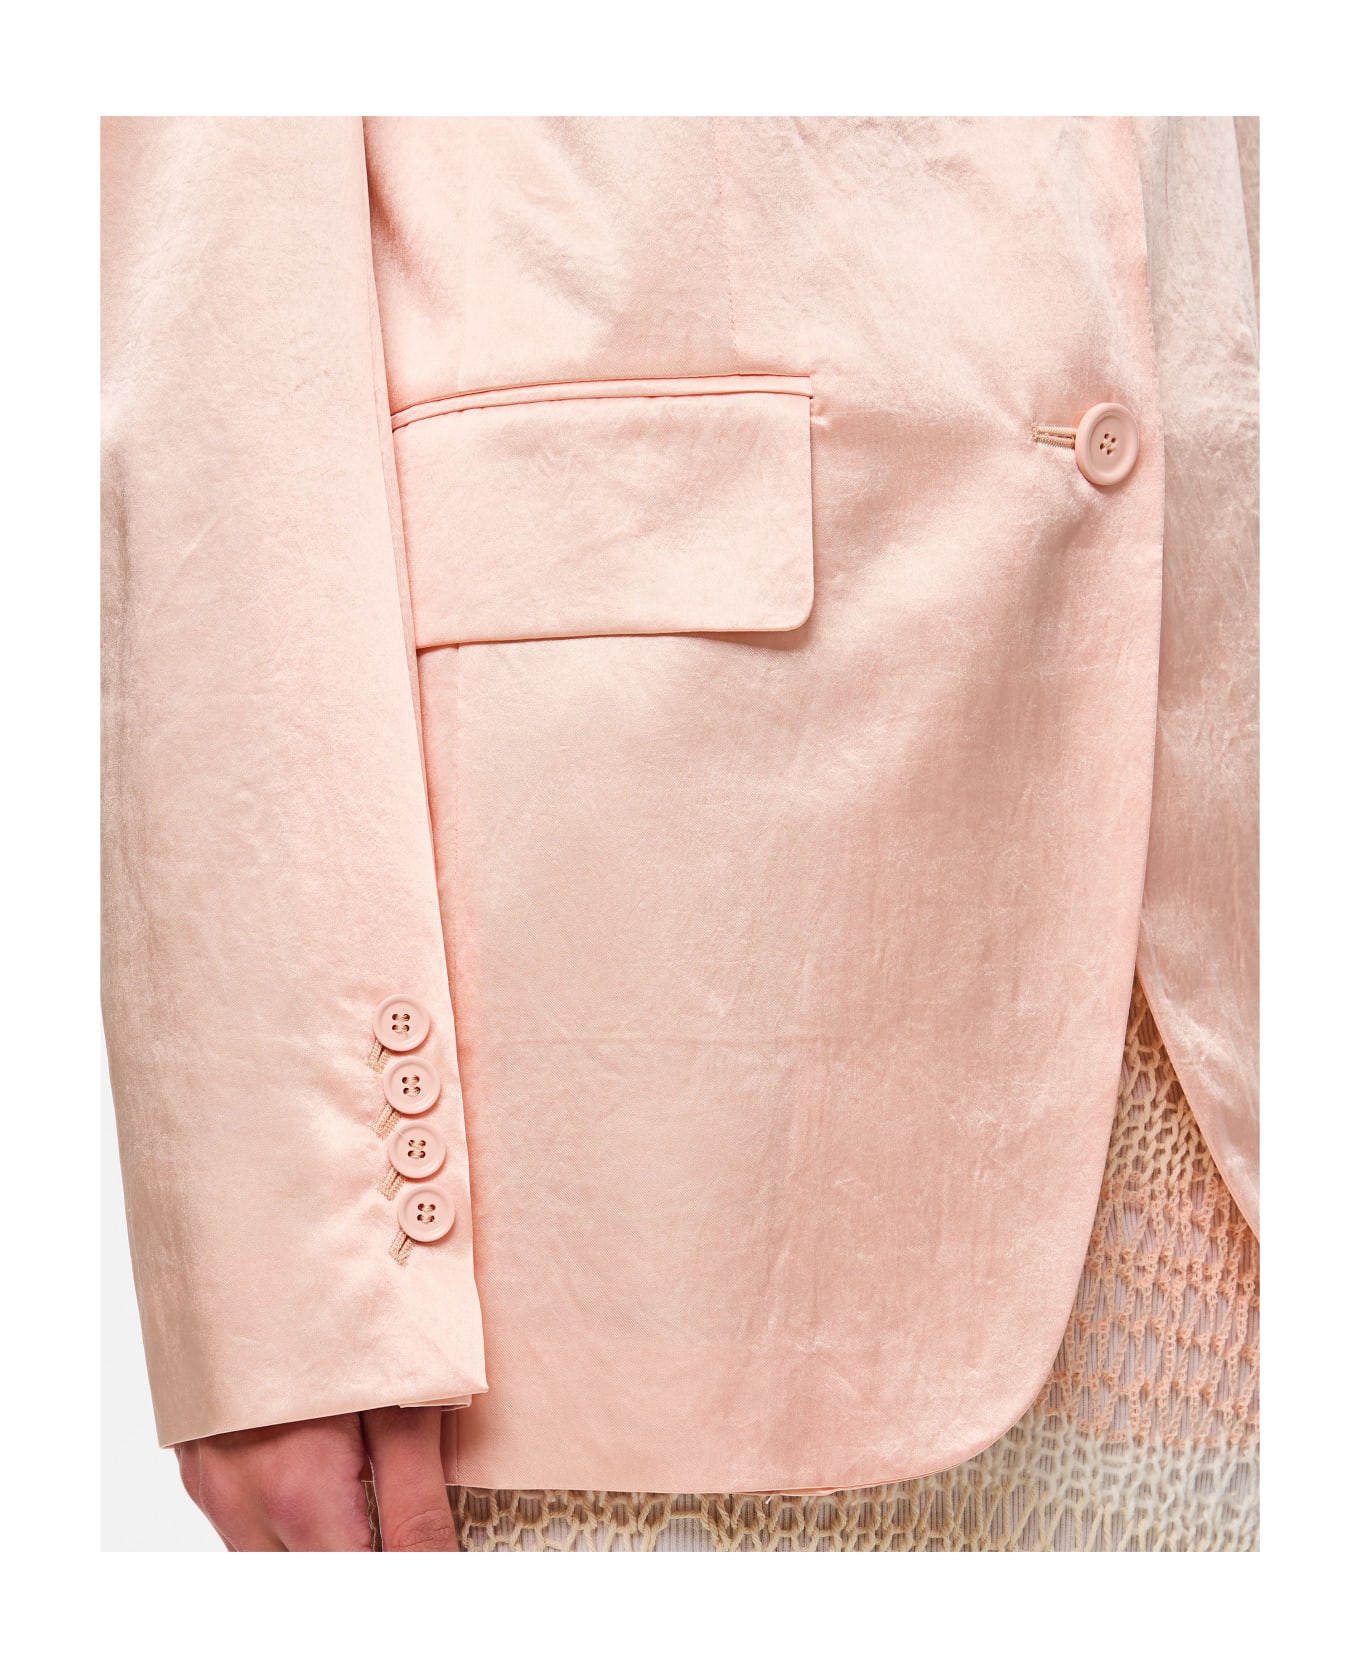 SportMax Volante Single-breasted Jacket - Pink